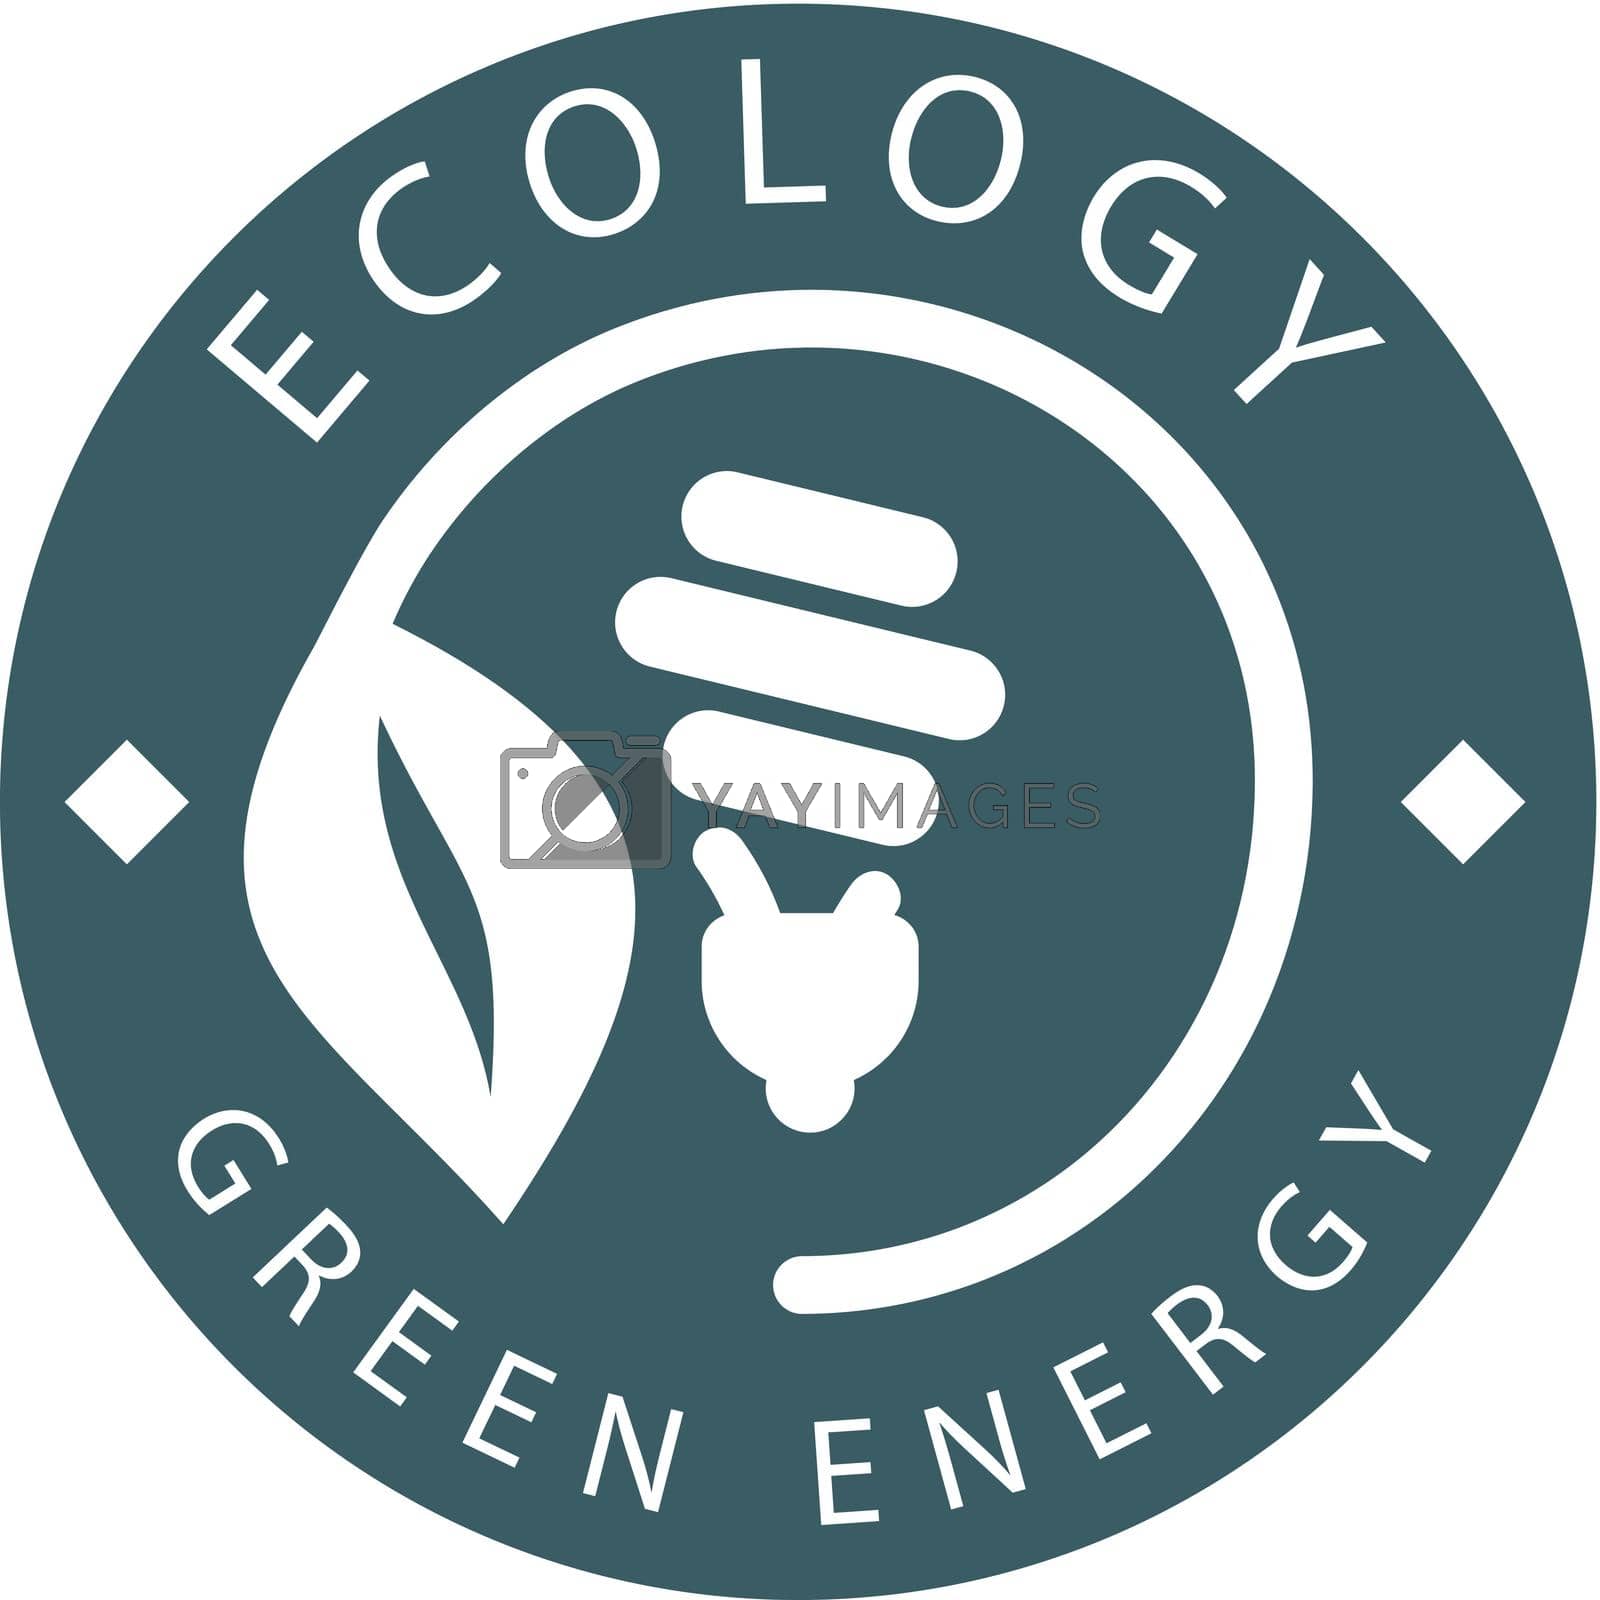 Royalty free image of Logo on the theme of green energy, ecology and zero pollution. Isolated on white background. Vector illustration. by Javvani